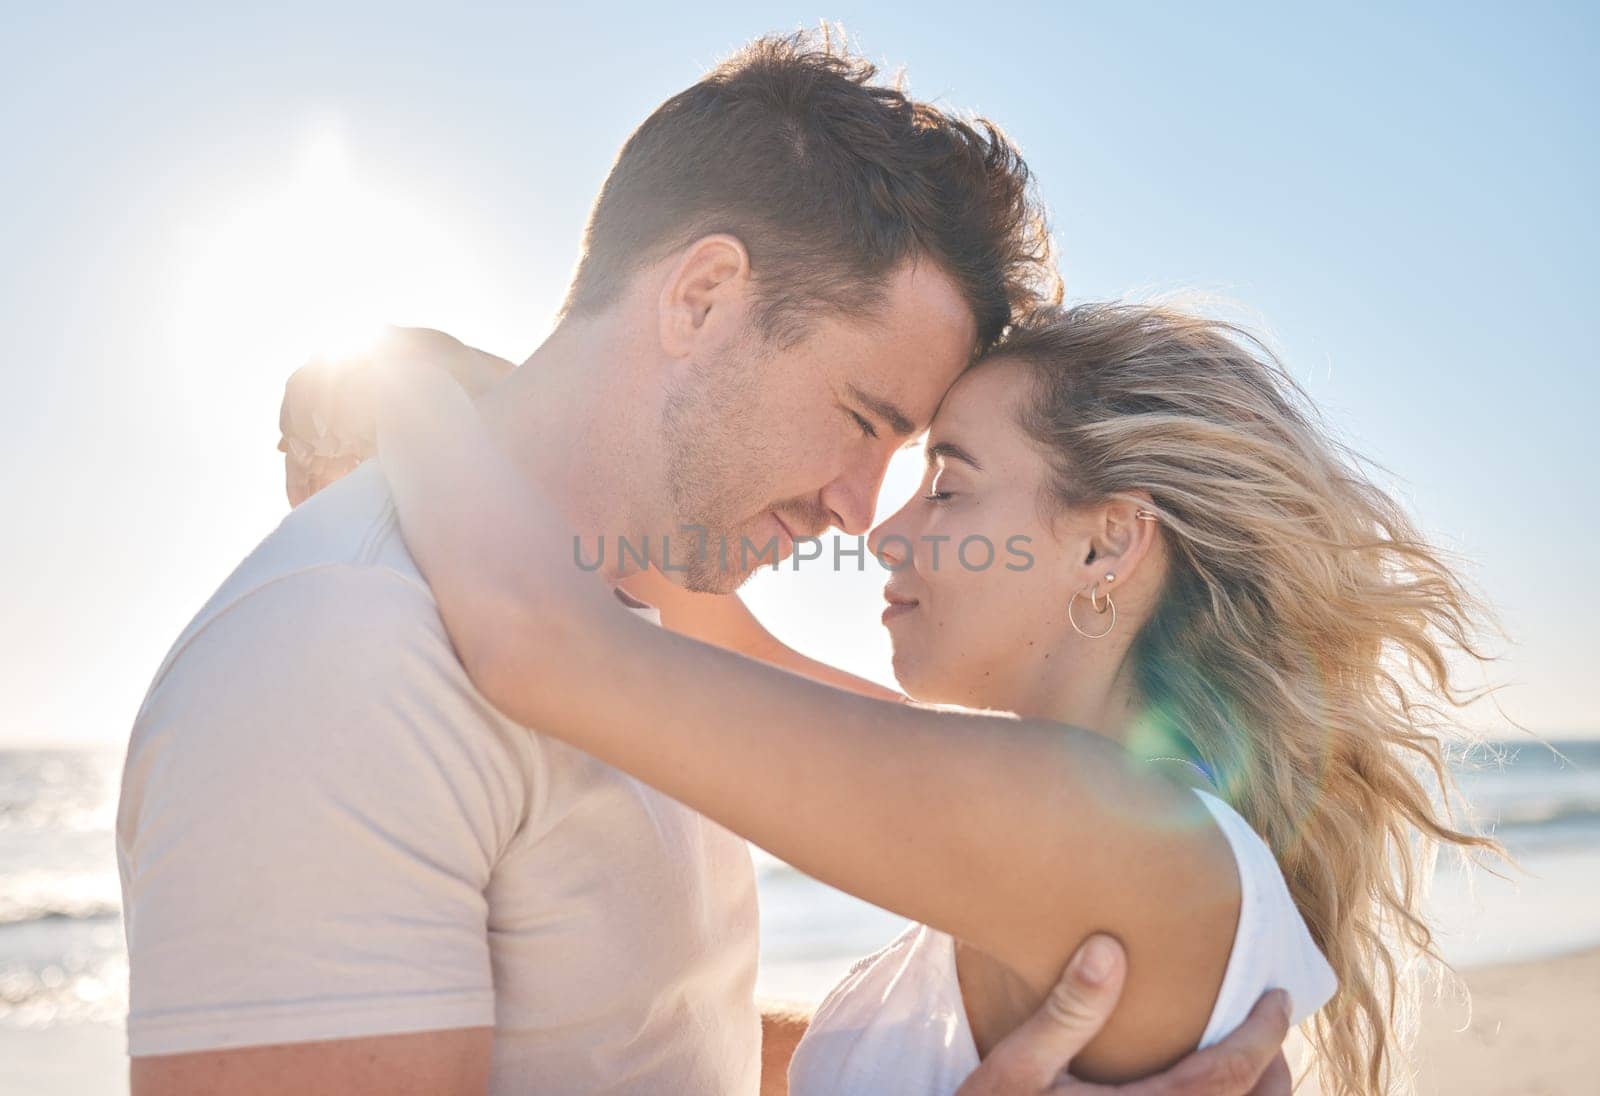 Love, travel and couple hugging at the beach while on a seaside date or honeymoon vacation. Affection, romance and young man and woman embracing while on a romantic holiday adventure by the ocean